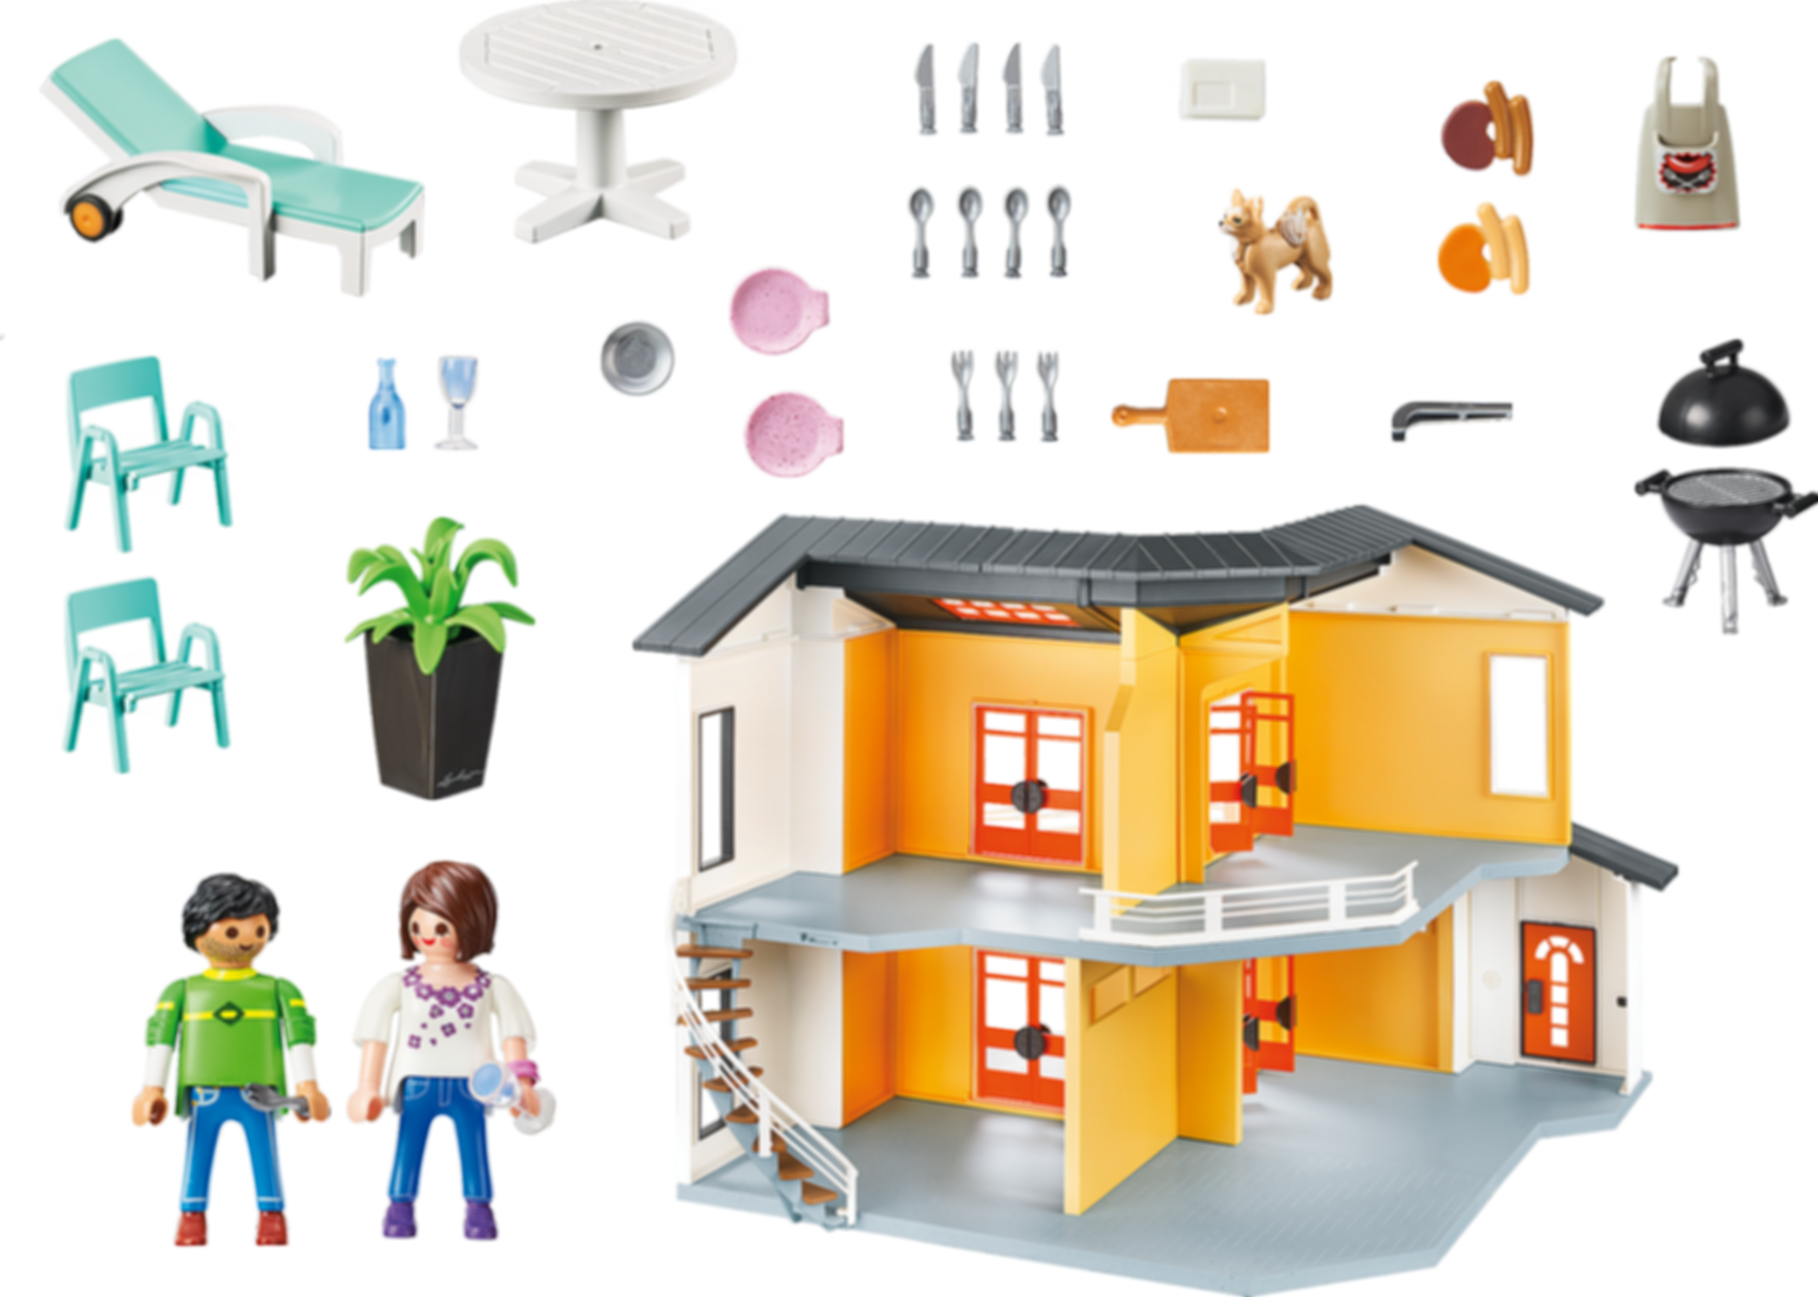 Playmobil® City Life Modern House components